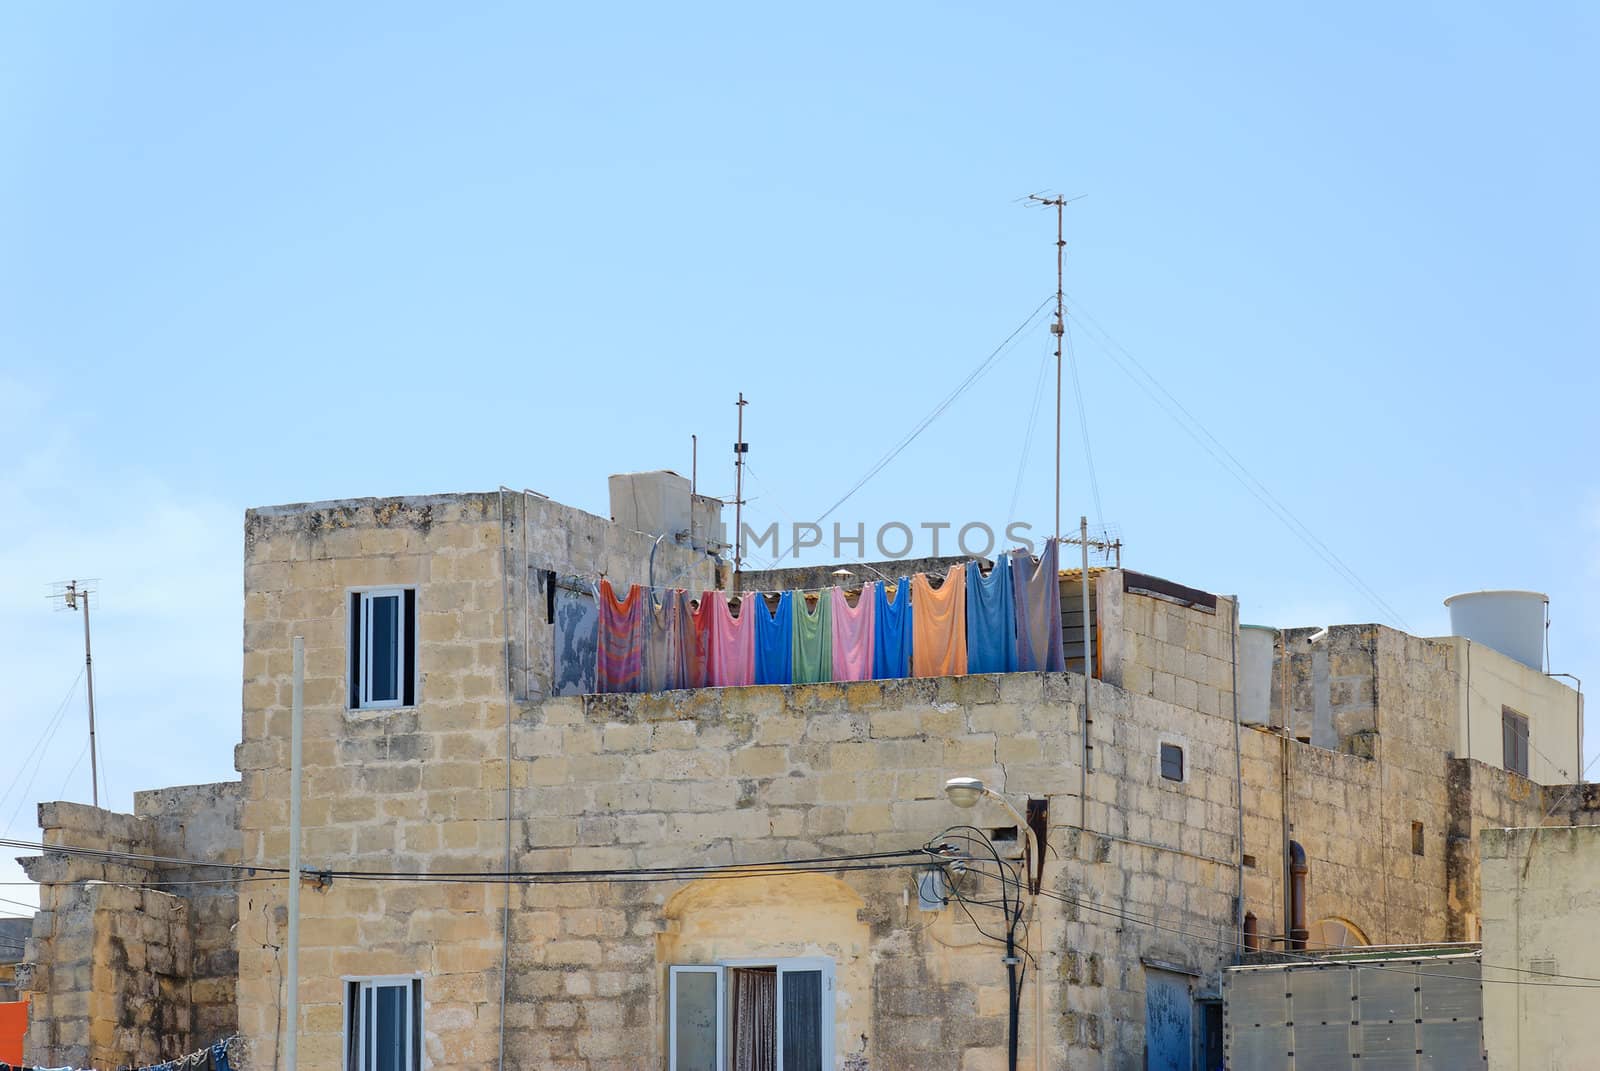 Multicoloured laundry, hanging for drying on a balcony of a Maltese house in Mdina.
